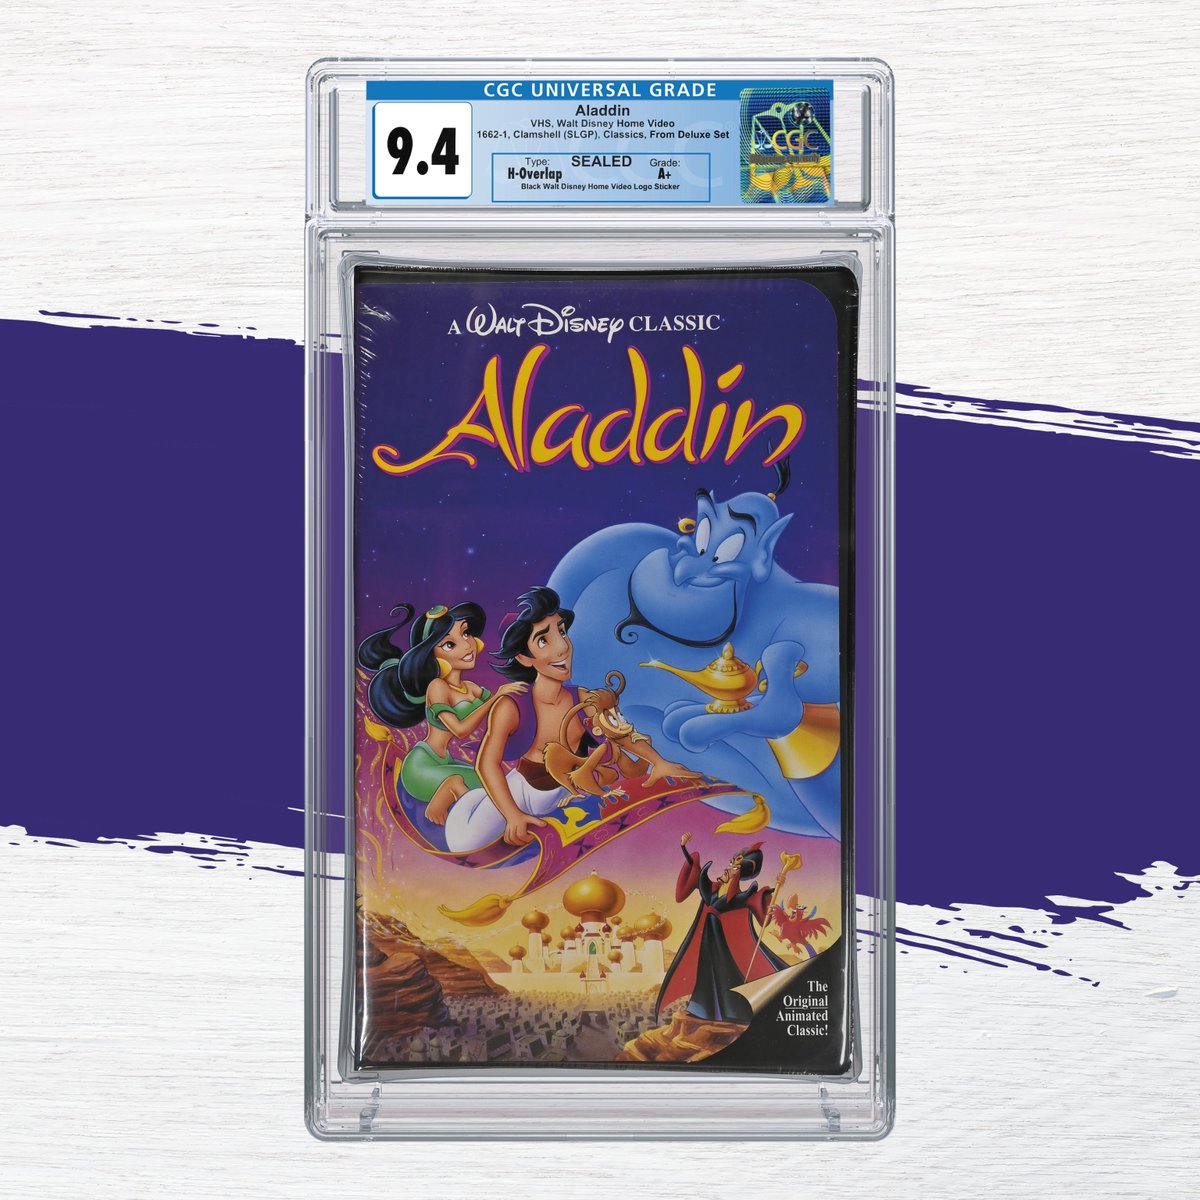 #DYK CGC Home Video grades Clamshell cases? Take Aladdin, a beloved Disney classic, holding special value in VHS format. Its unique artwork and packaging differ from modern releases. Grading with CGC offers peace of mind, protection, & potential value appreciation for collectors